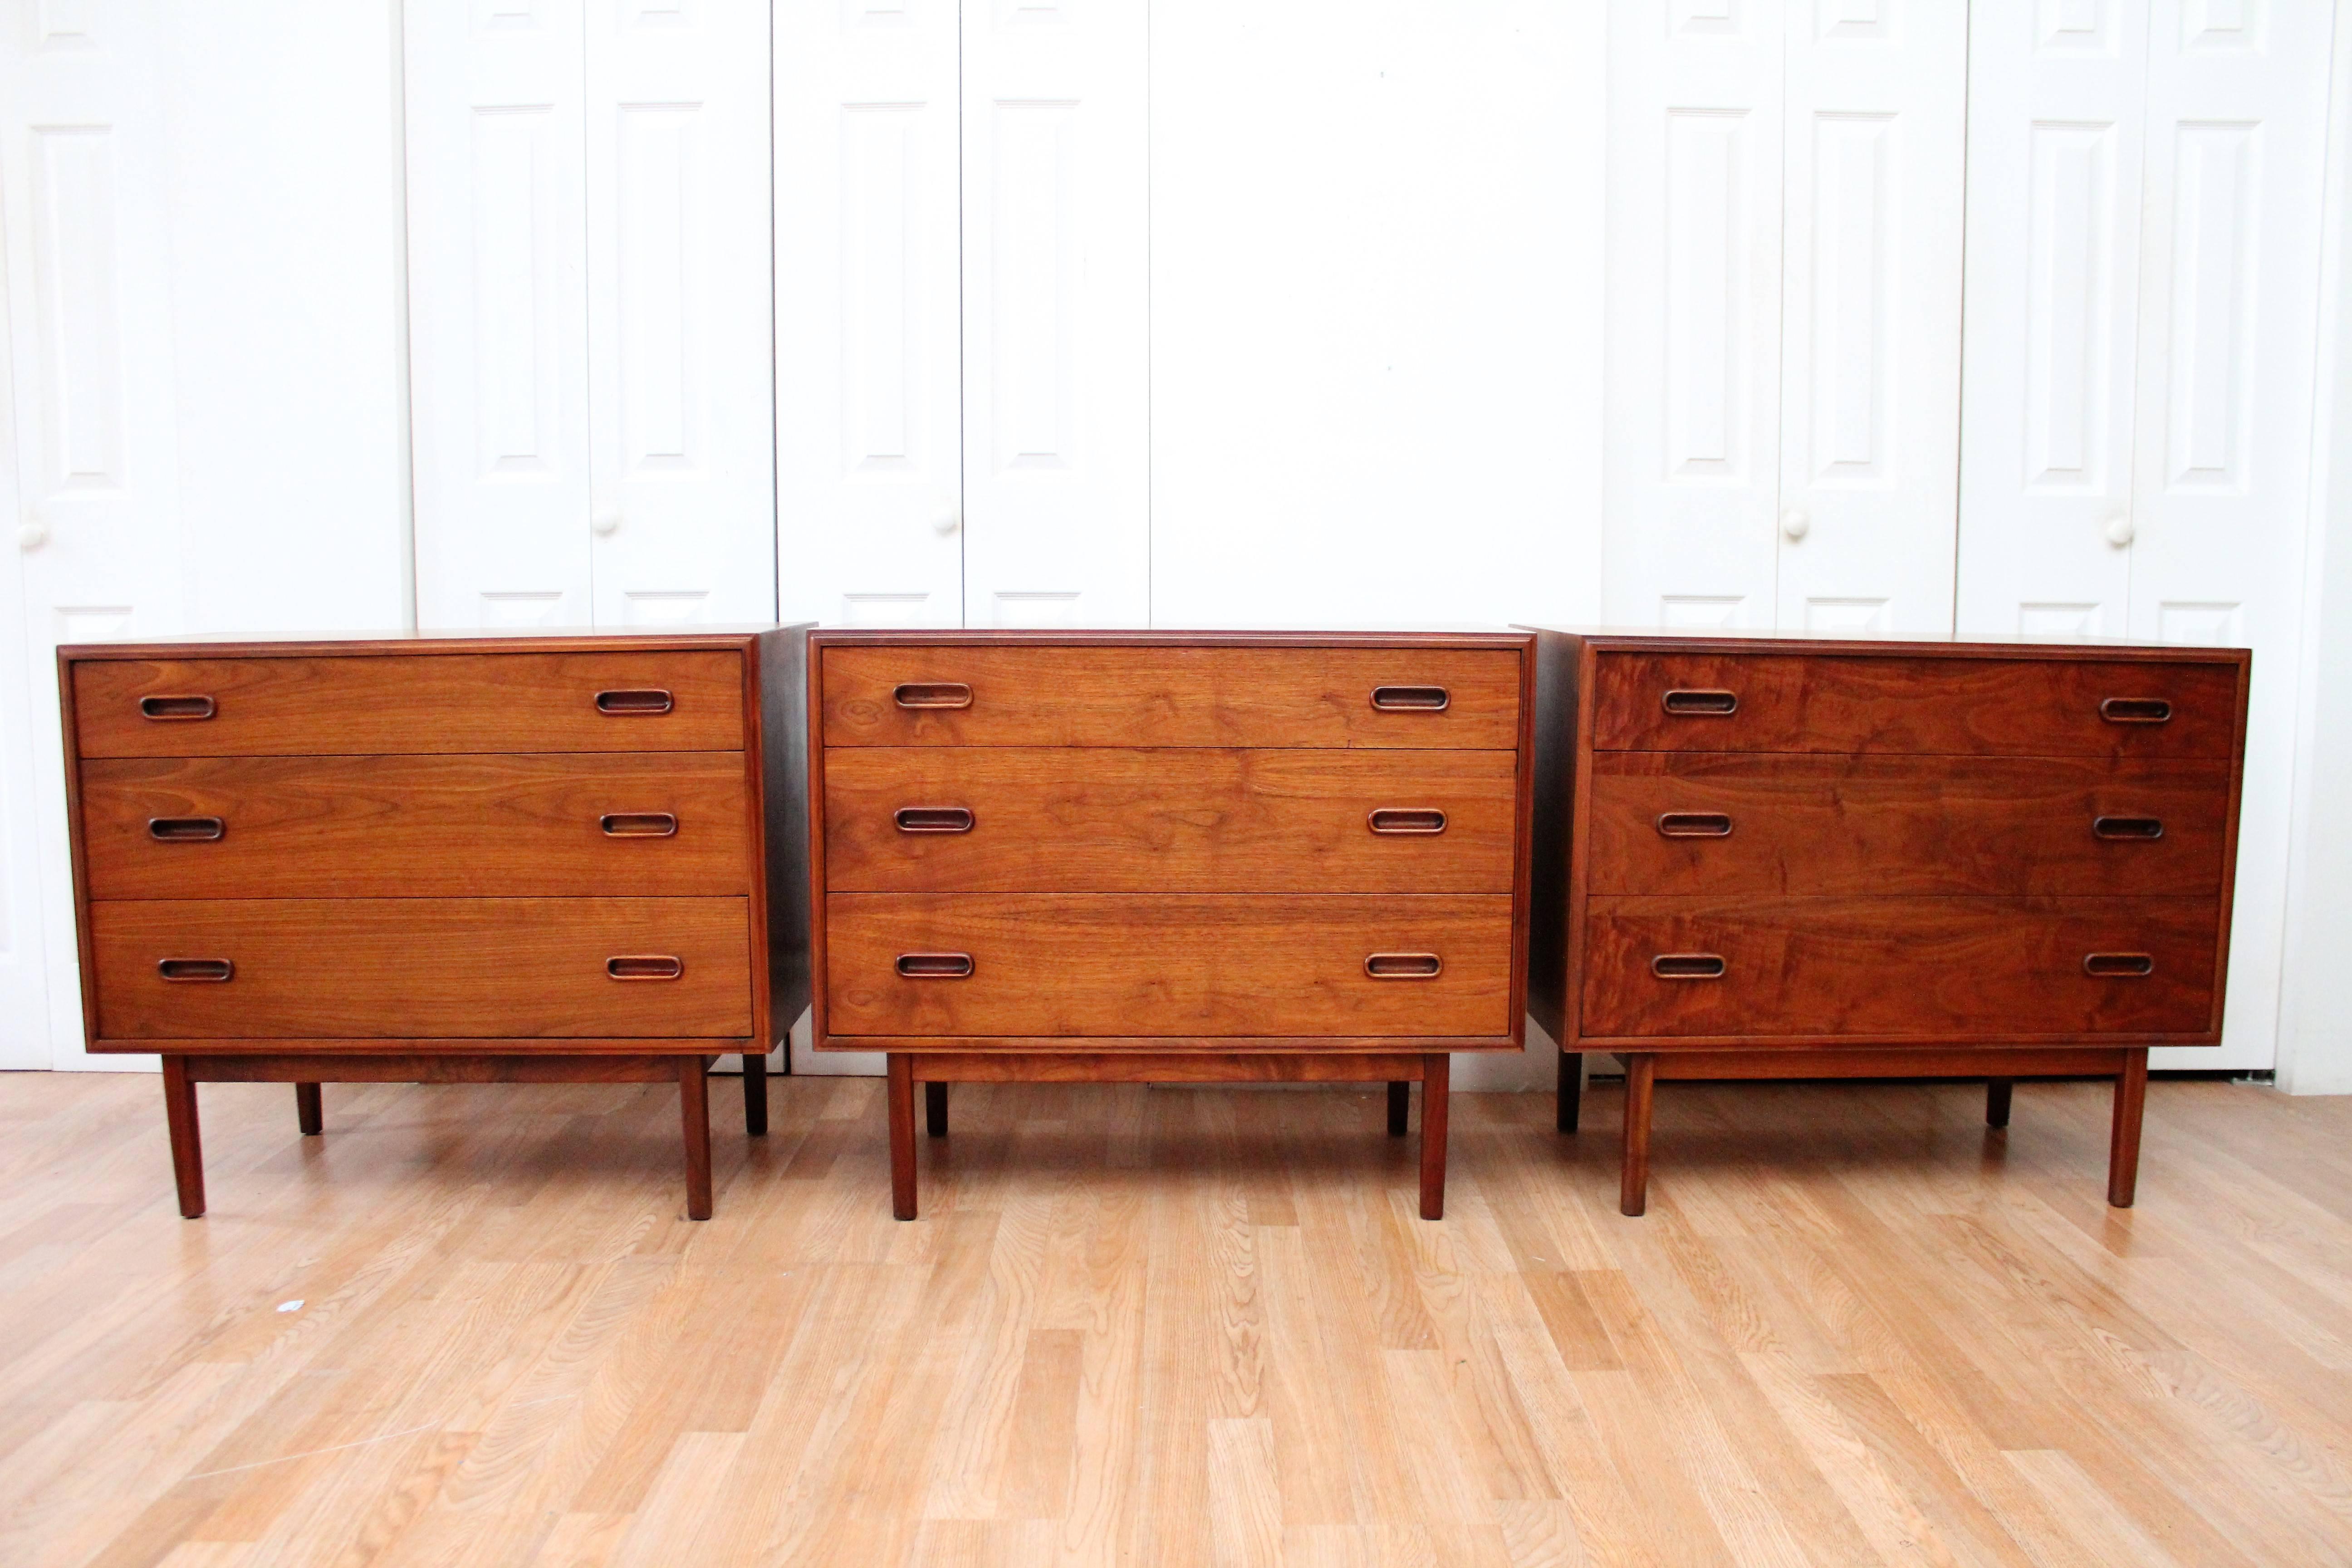 Founders Mid-Century Modern chests cabinets in walnut. Note how the unique handles add a little something extra to the beautiful craftsmanship of these pieces. Purchase per piece or all.